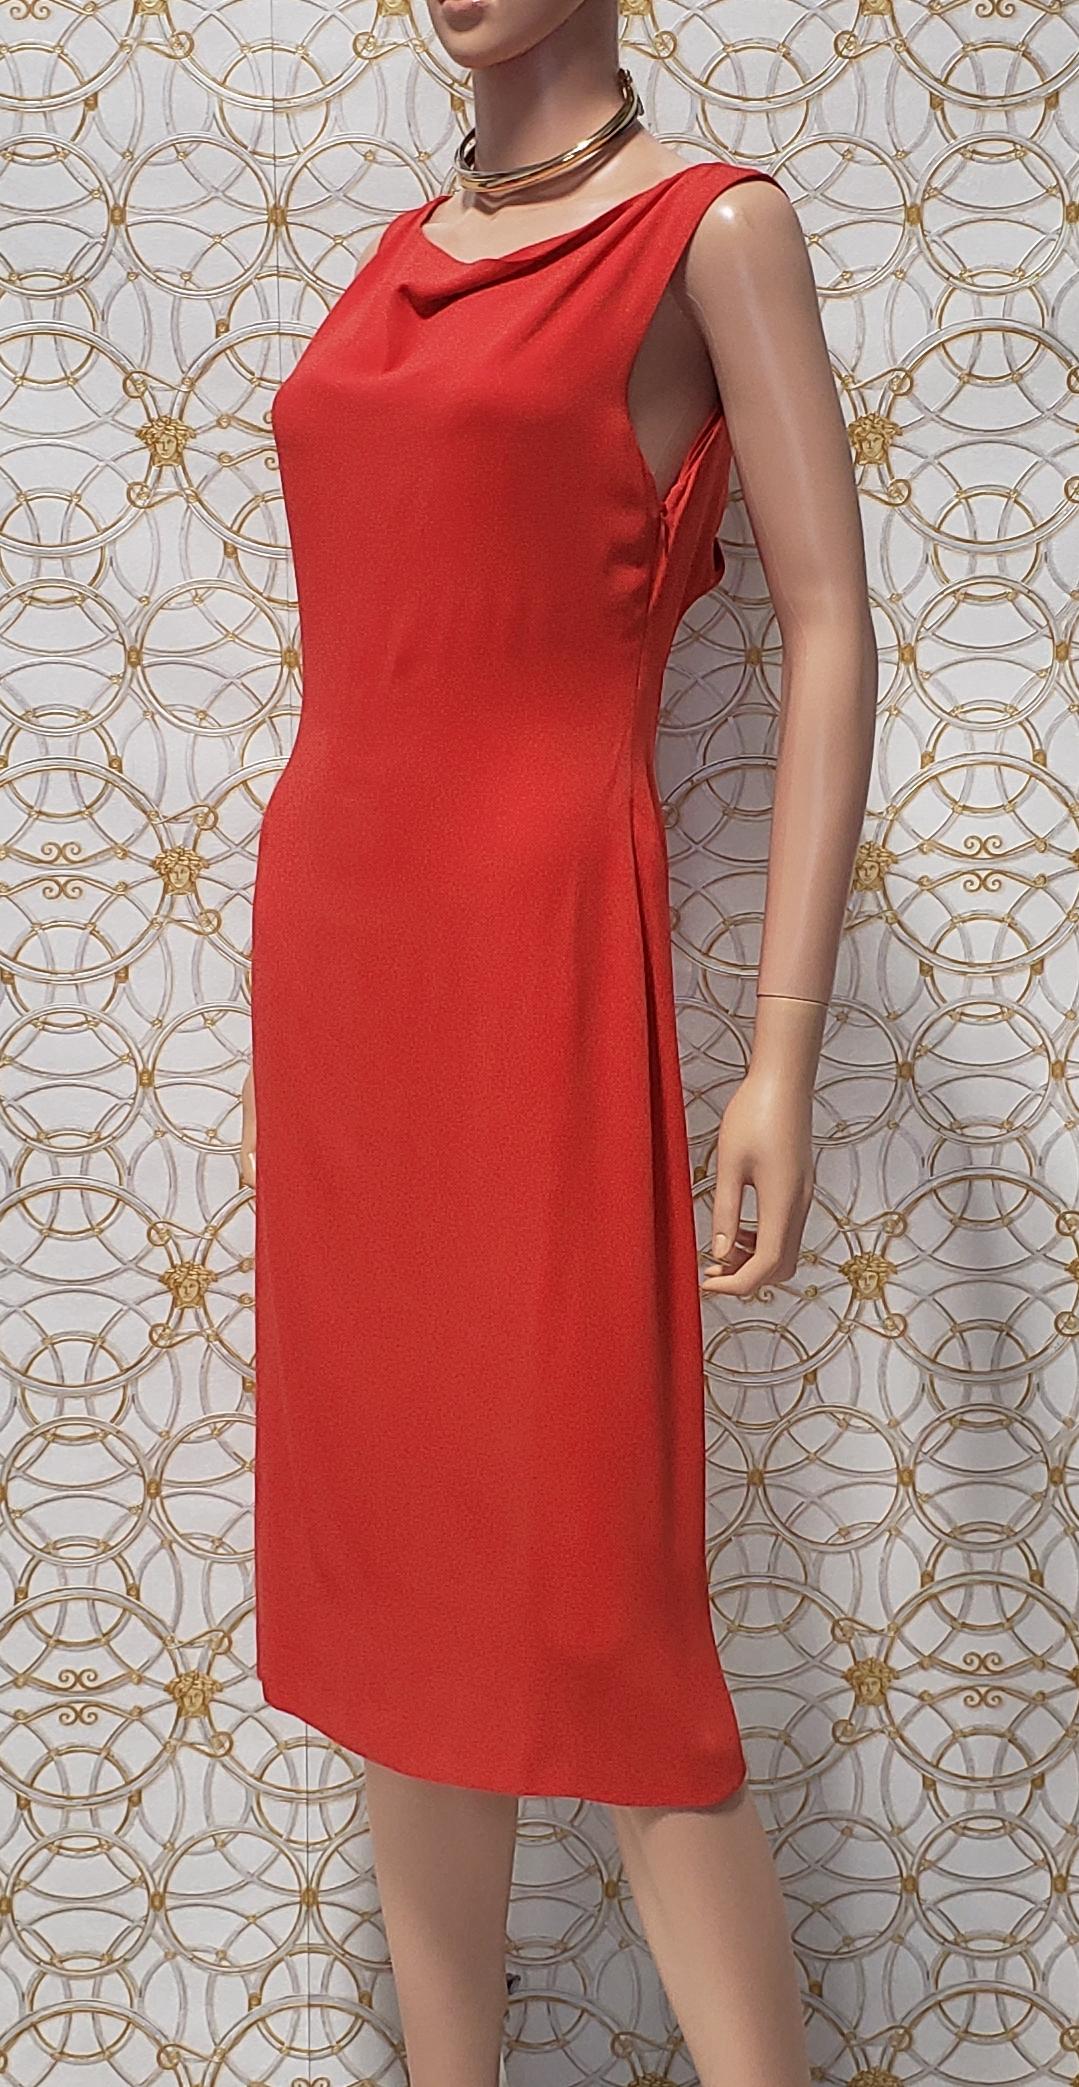 GIANNI VERSACE COUTURE

1998

Red dress

Cutout on the back

Made in Italy

Content: 100% silk

Fully lined

IT Size 44 - US 10

armpit to armpit 18 1/2